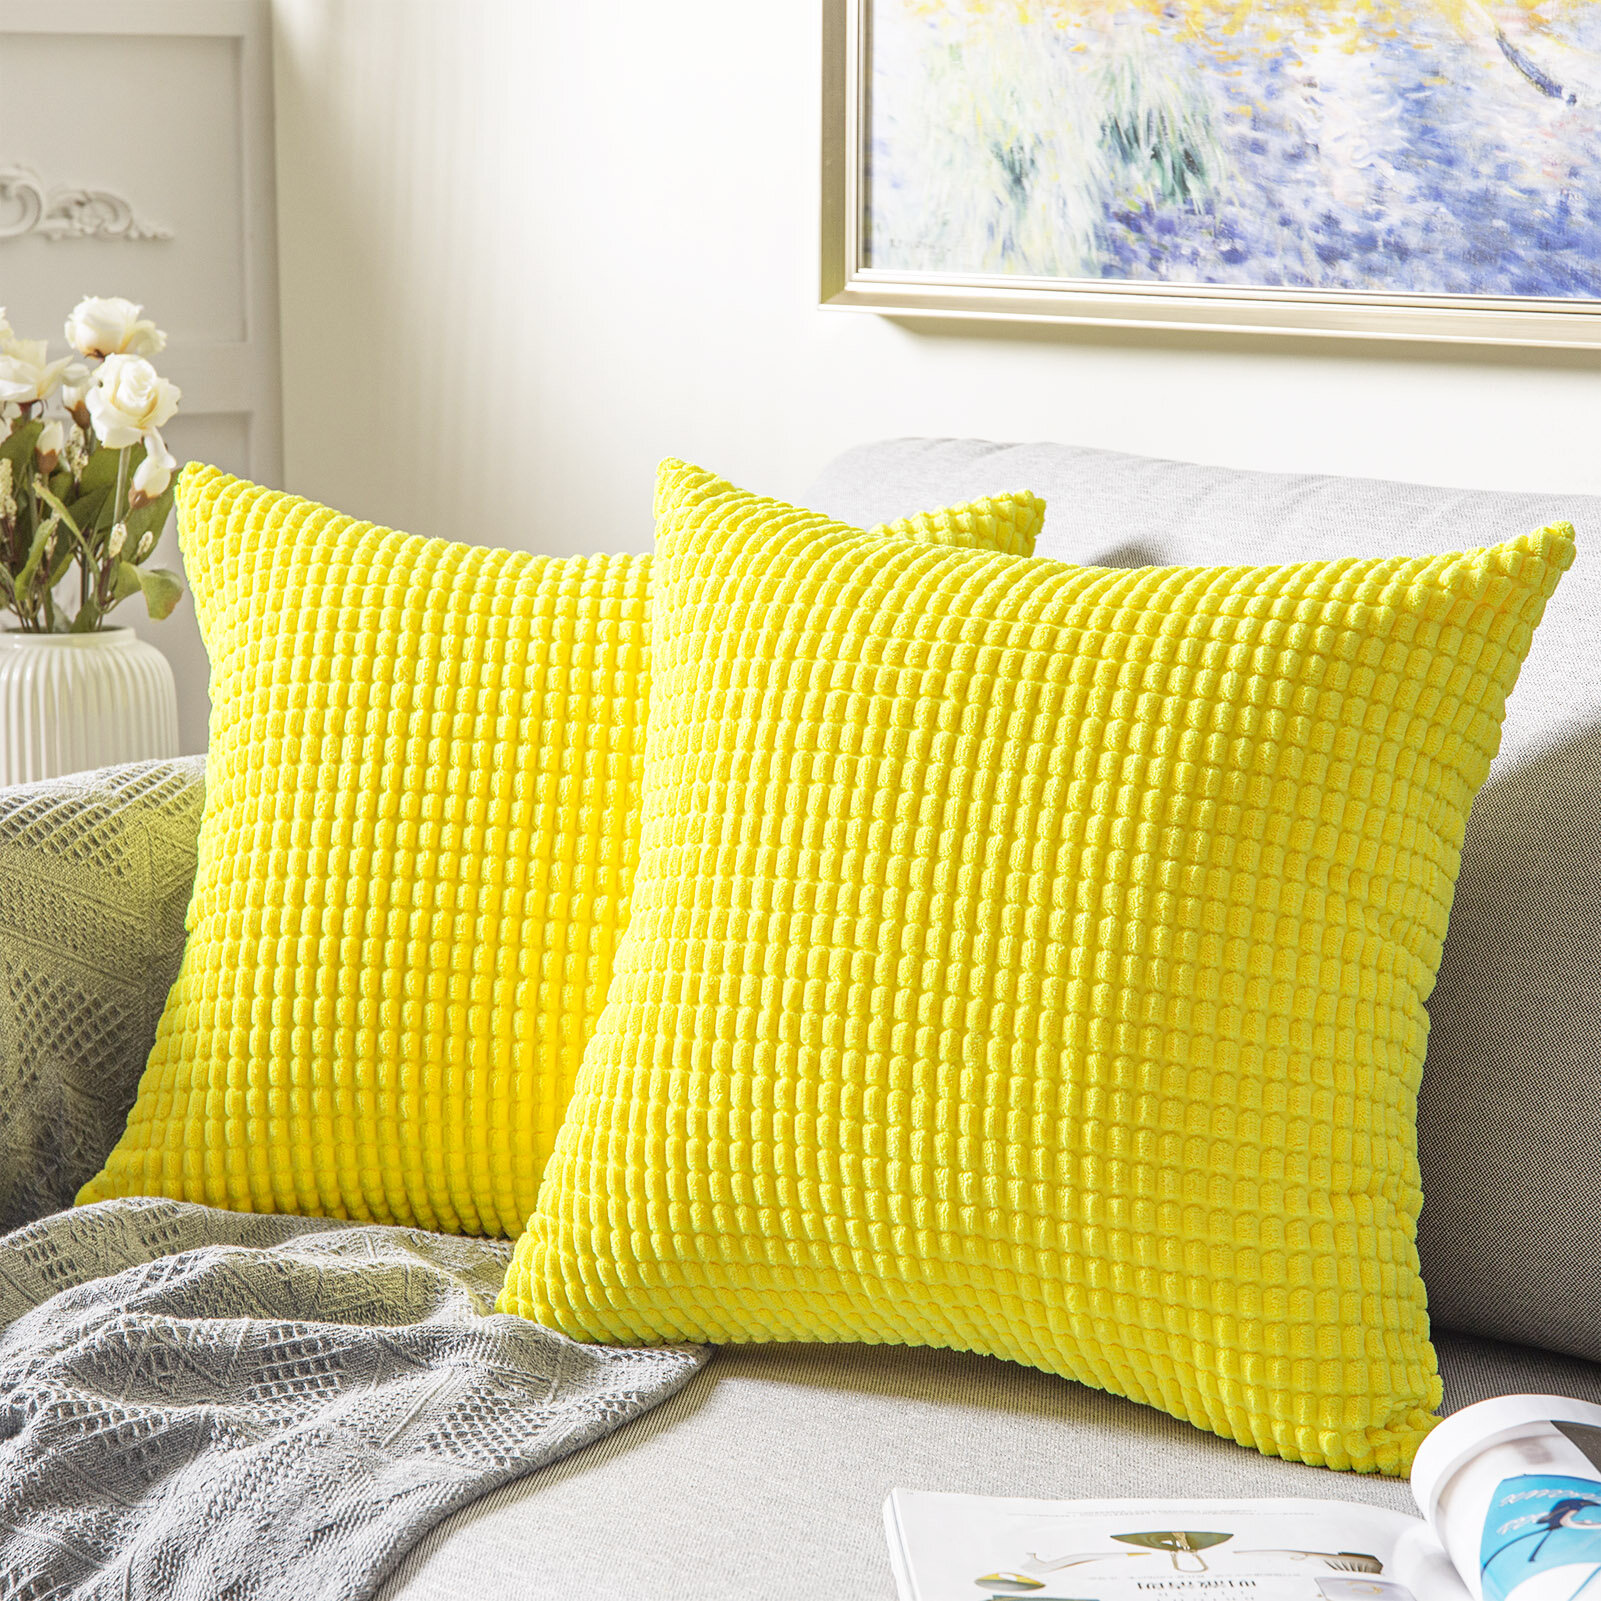 Square 18x18 Polyfill Pillow Insert